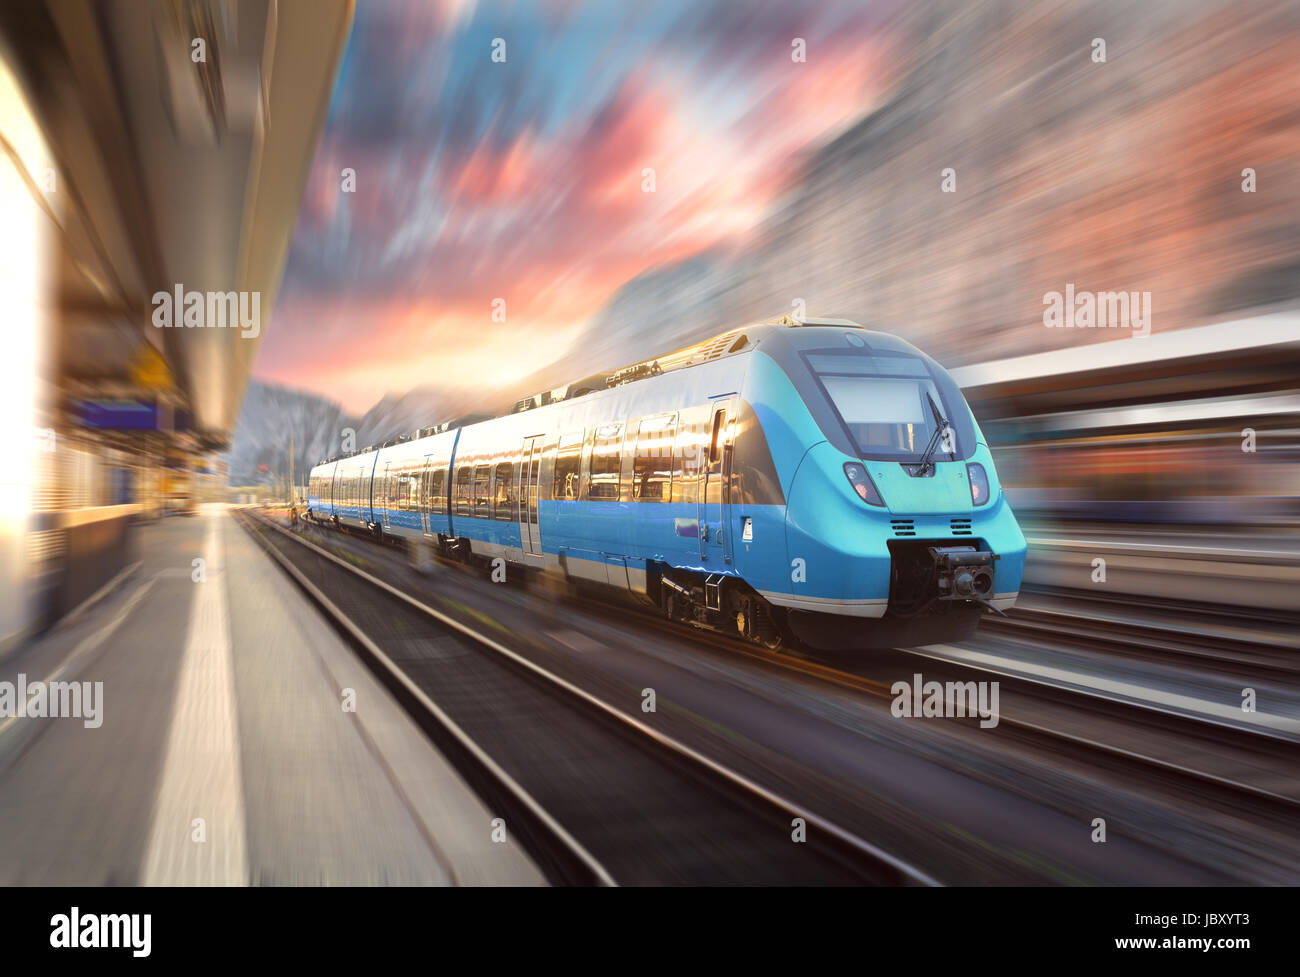 High speed train in motion at the railway station at sunset. Modern european intercity train on the railway platform with motion blur effect. Industri Stock Photo